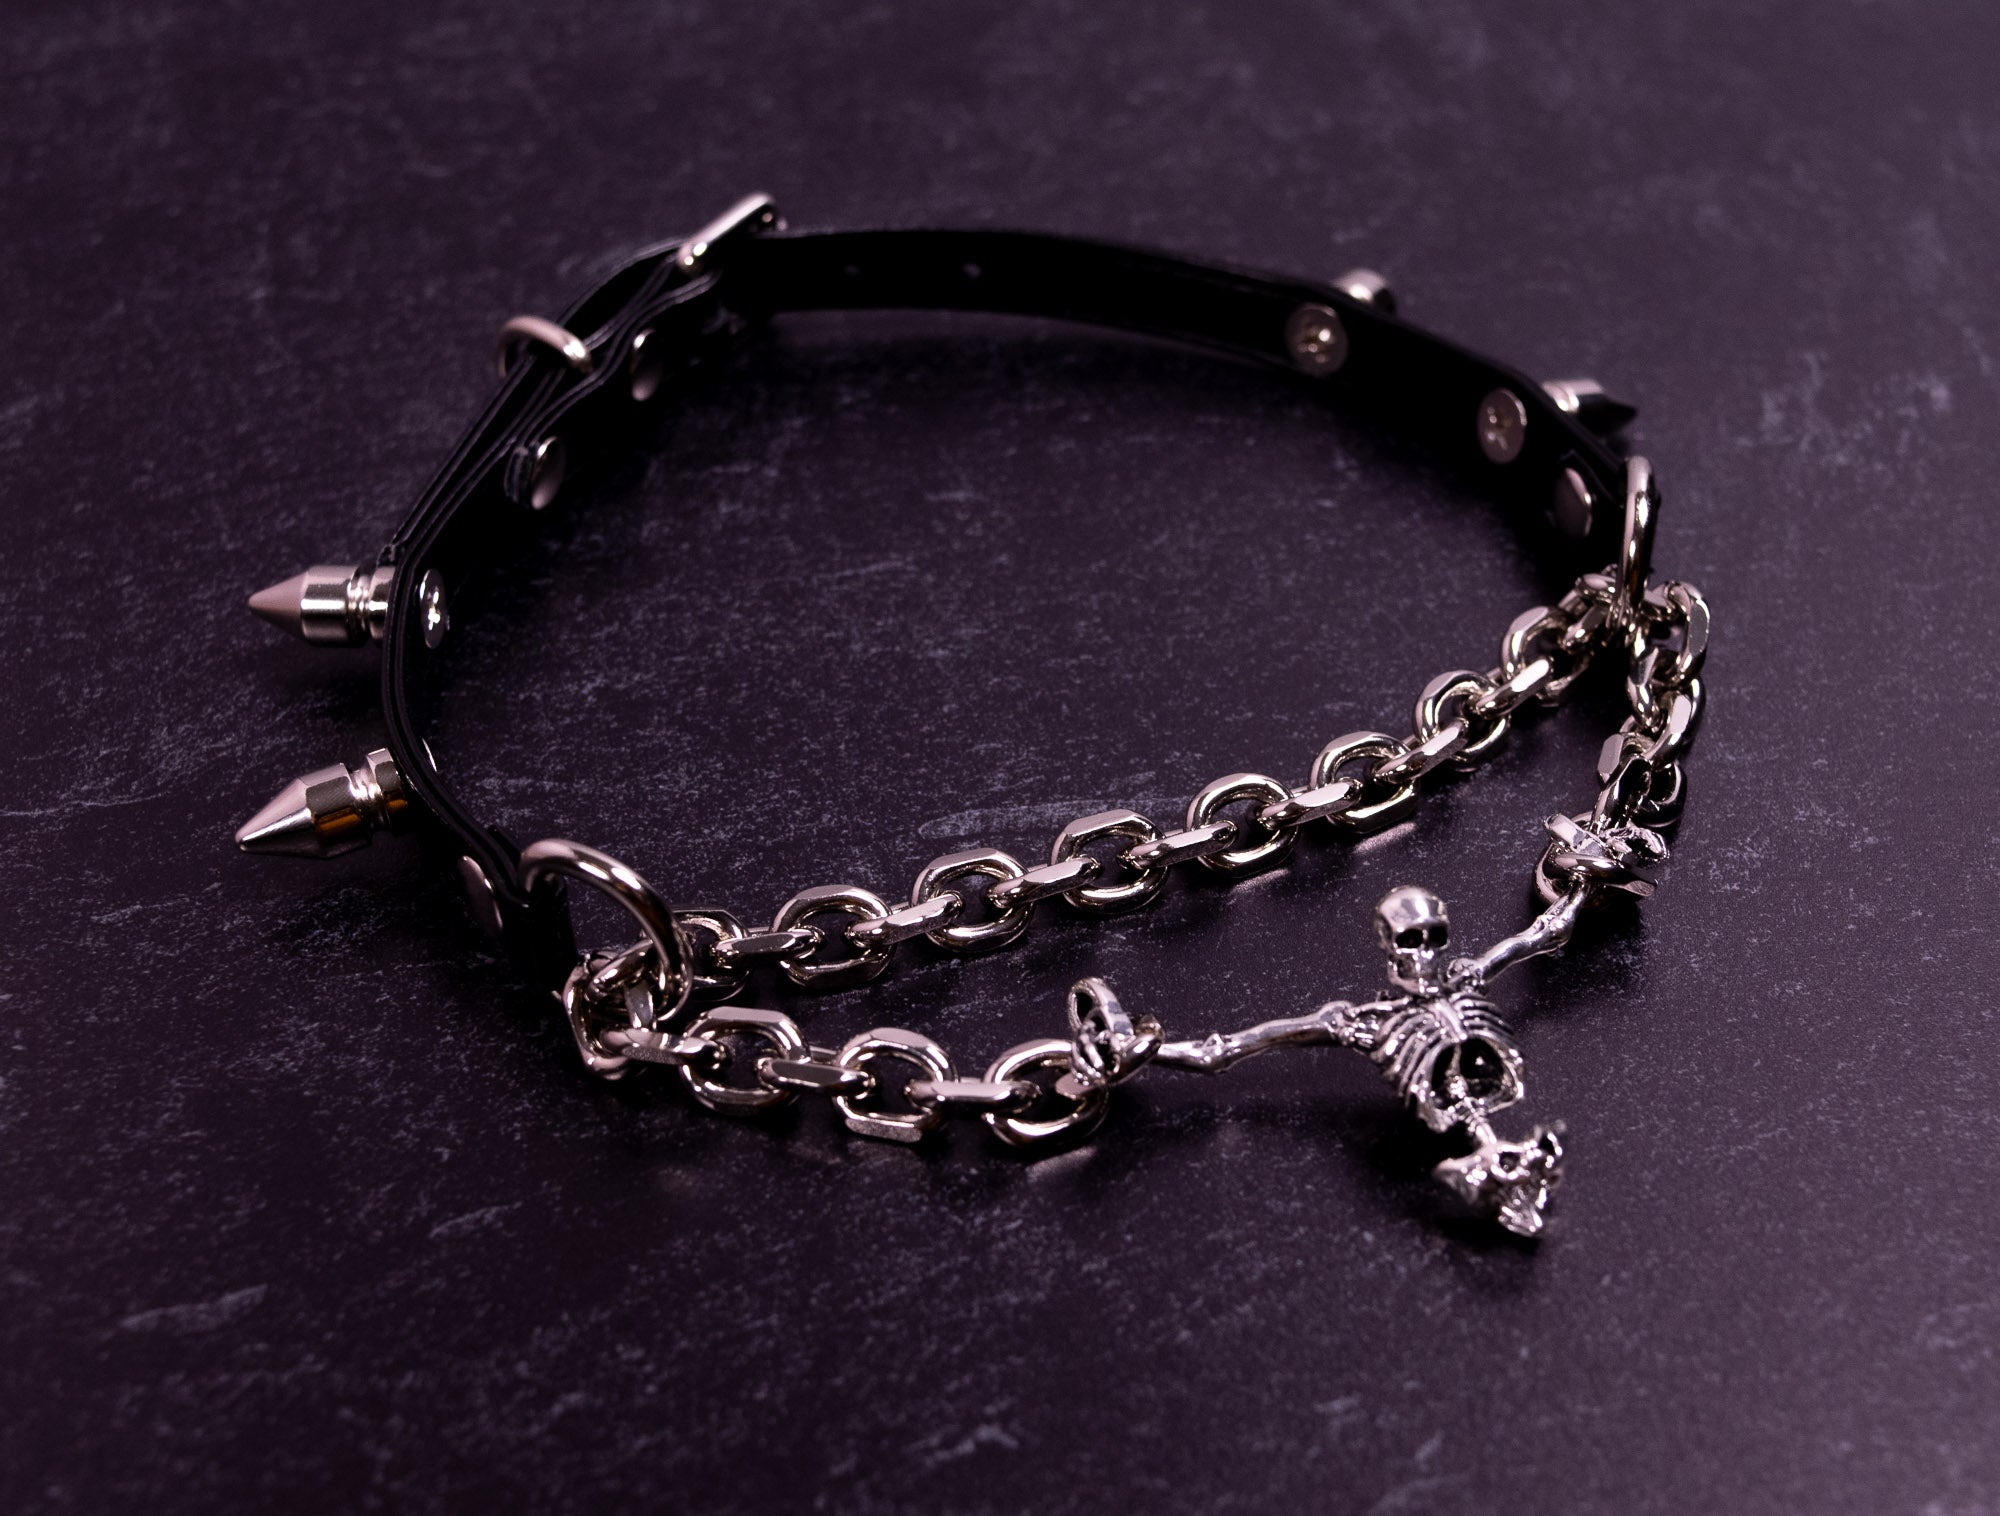 'Chained Up' - 3/8" Black Vegan Leather Martingale Collar